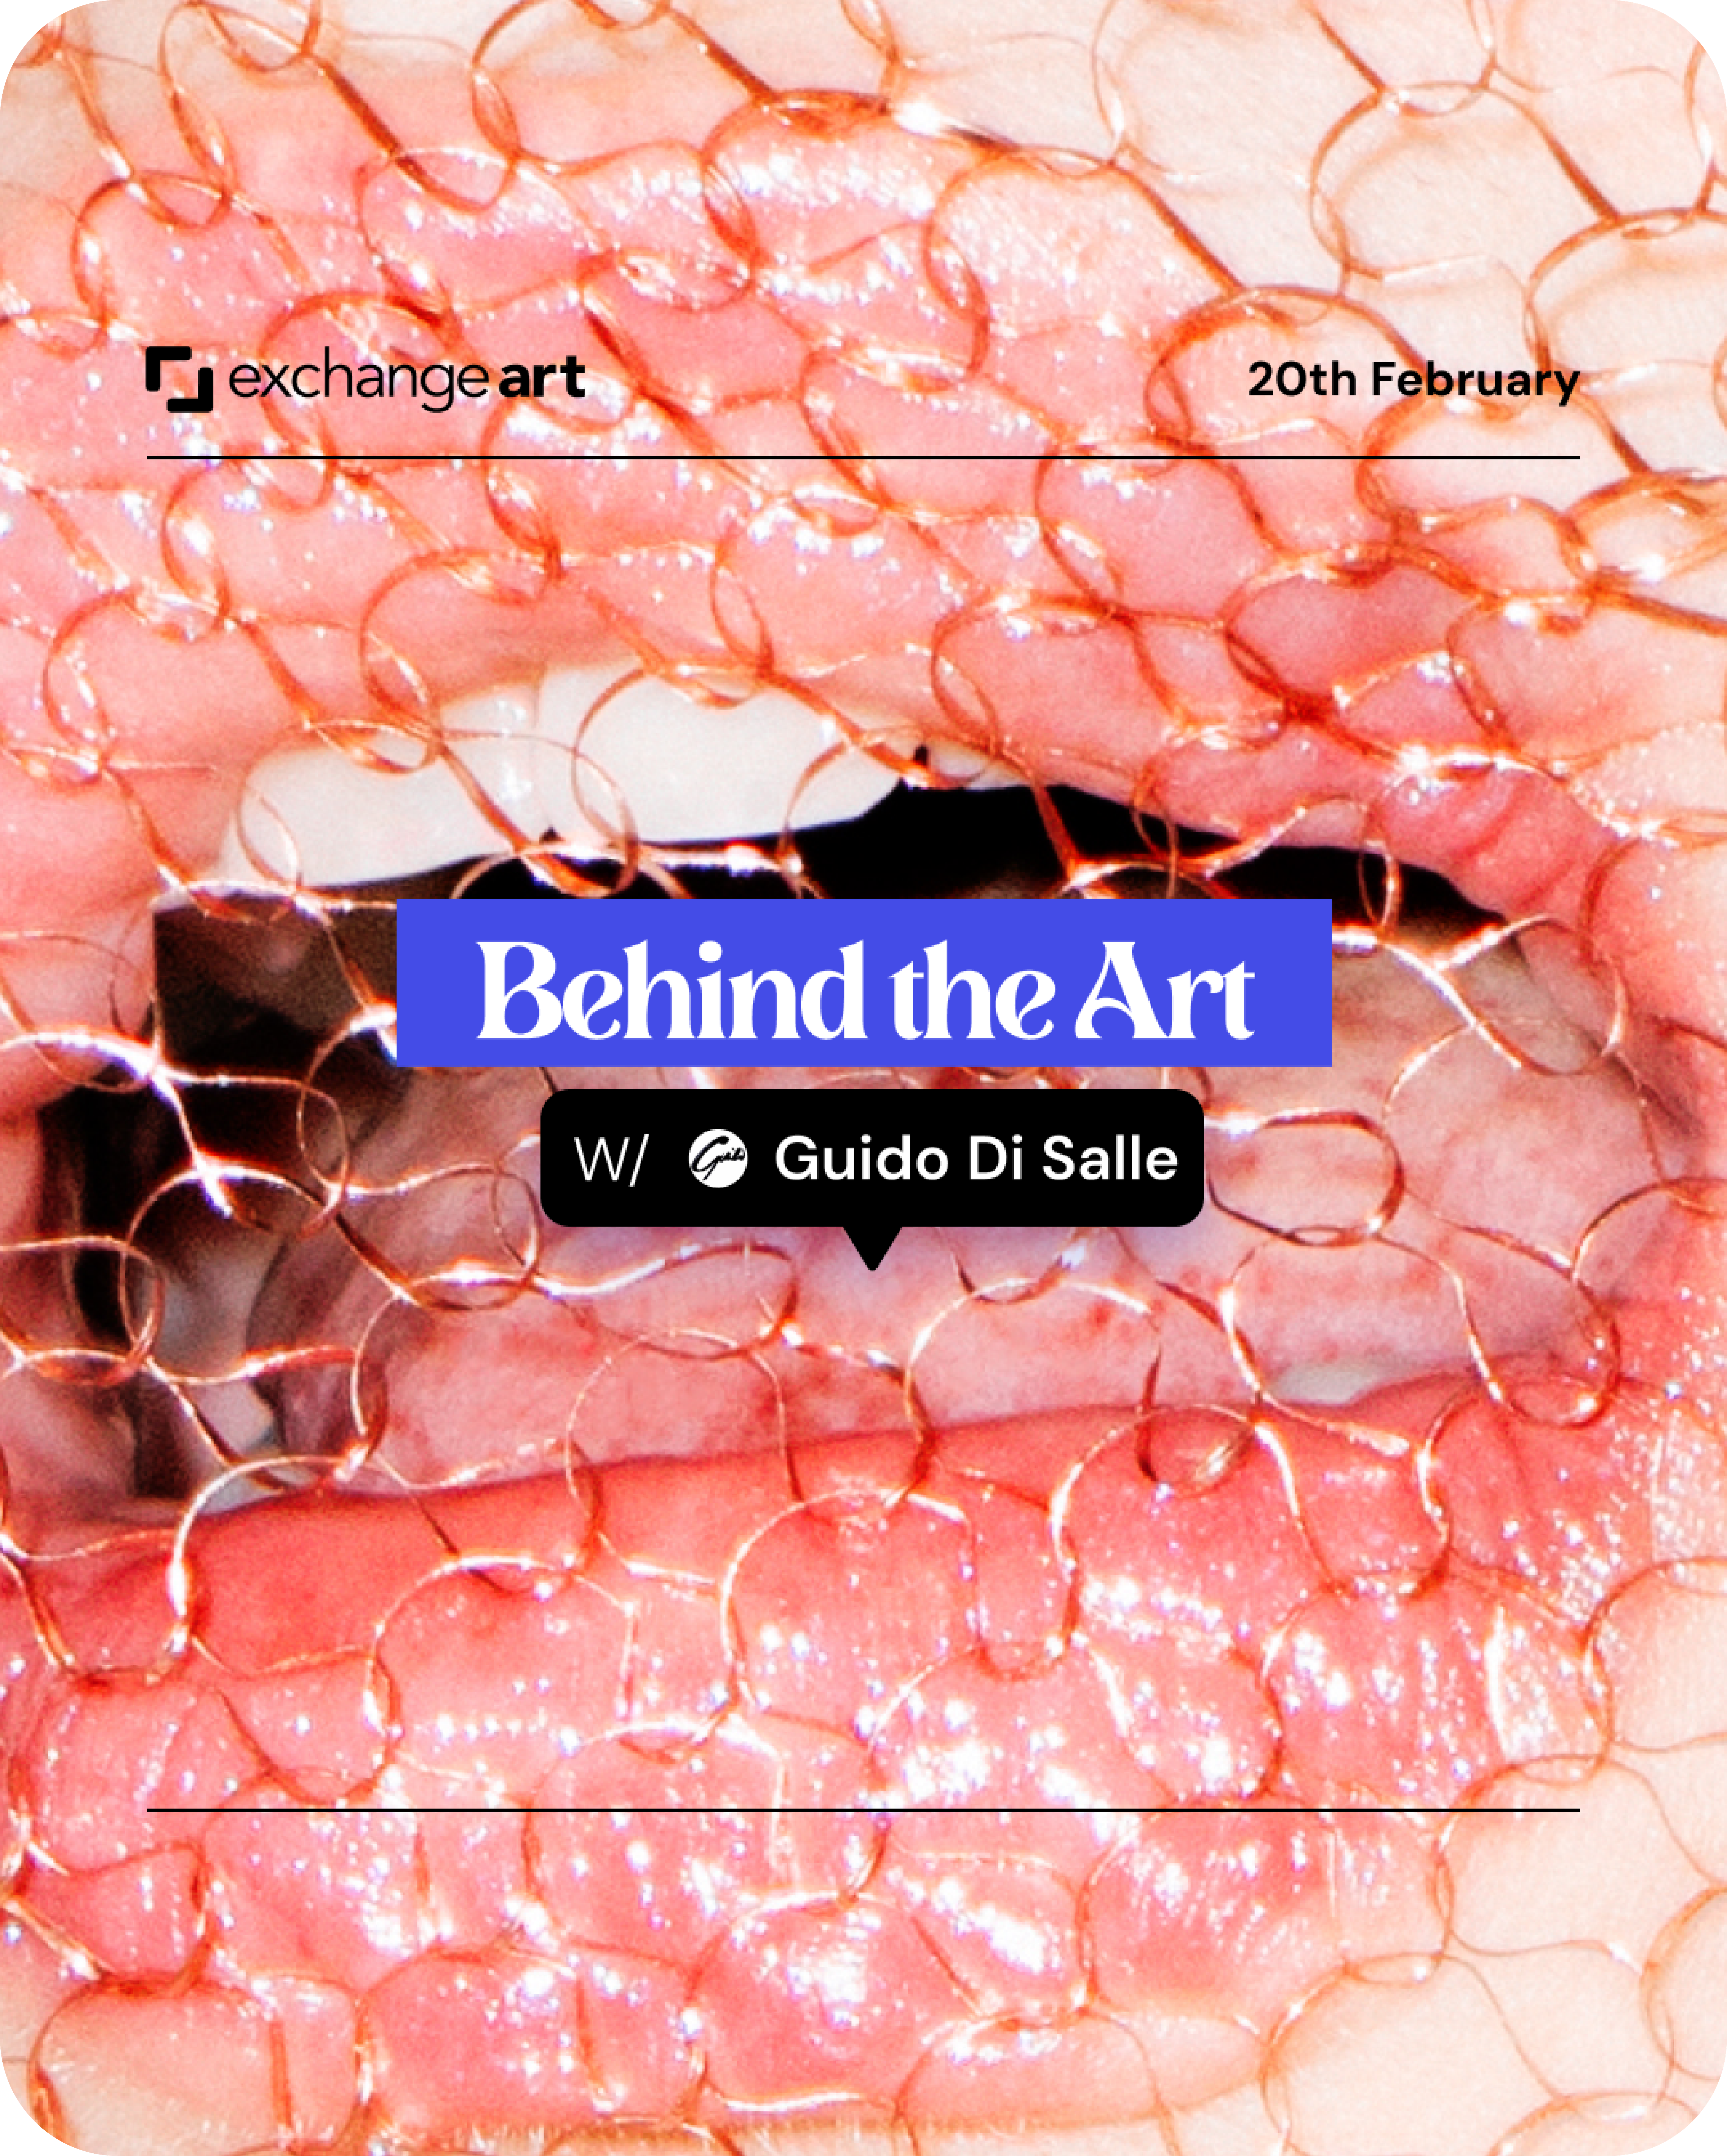 Behind the Art with Guido Di Salle